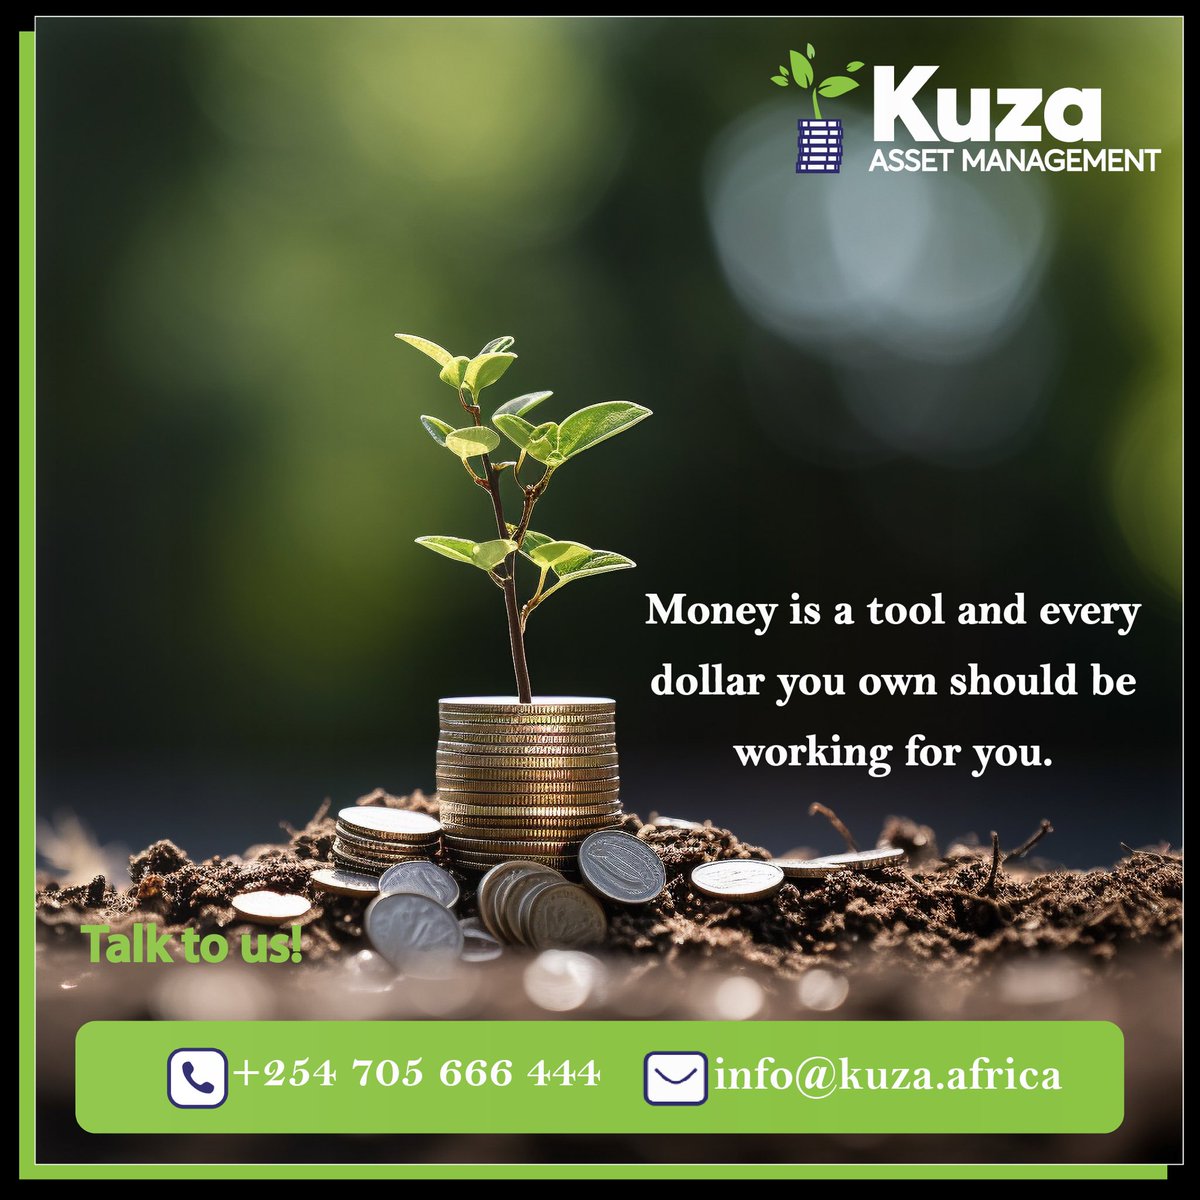 Unlock the potential of your dollars! Invest with us today and start building your financial future.

#investwithus #kuzaassetmanagement